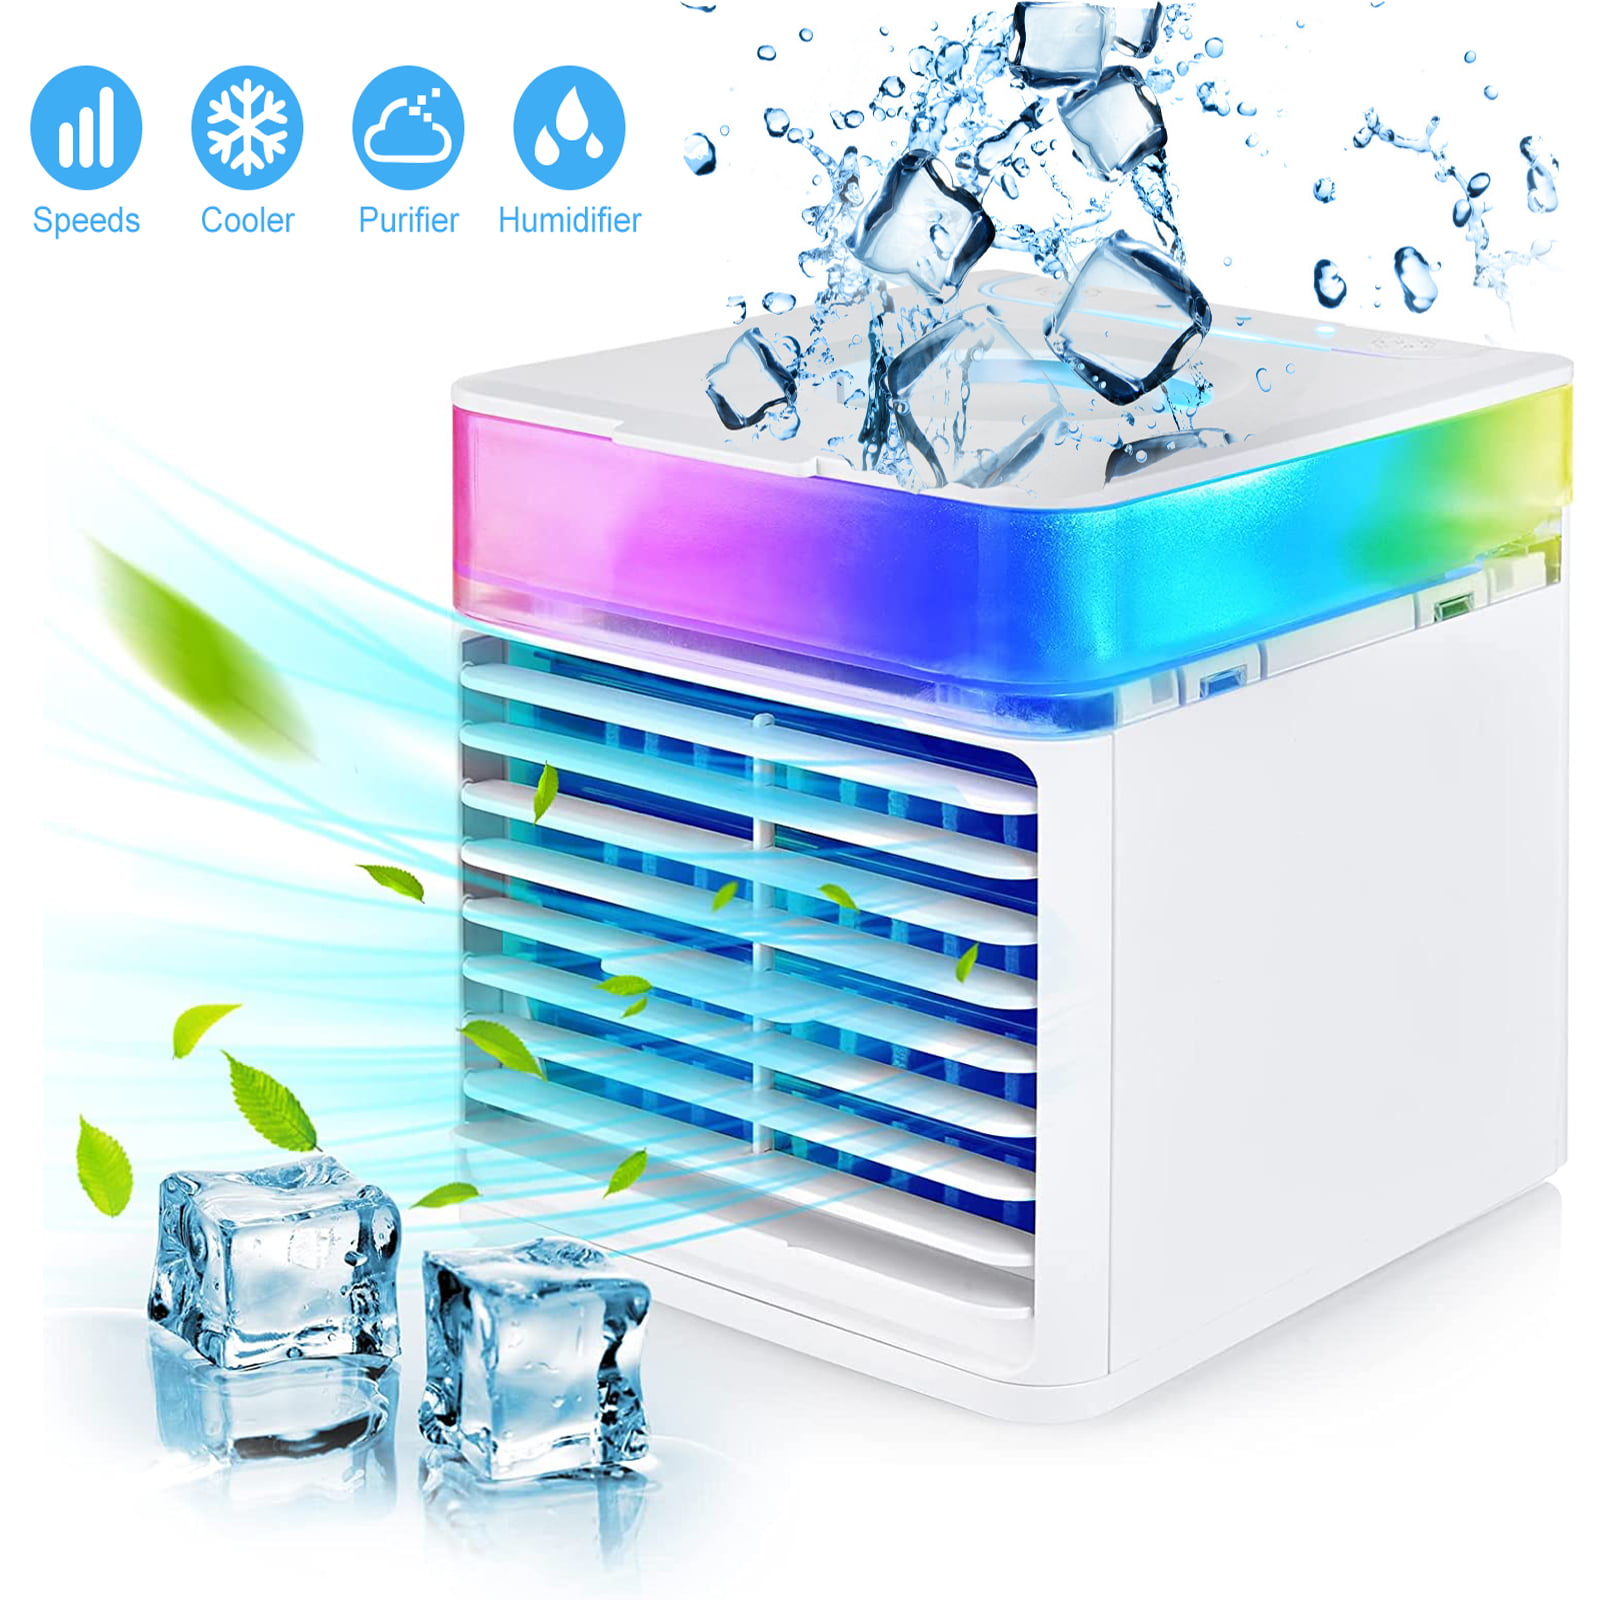 Mini Evaporative Cooler,4 In 1 Humidifier Purifier Night Light Desk Air Conditioner With 3 Speed For Quick Cool Home Office Bedroom Outdoor Volwco Personal Air Cooler Portable Air Conditioner Fan 